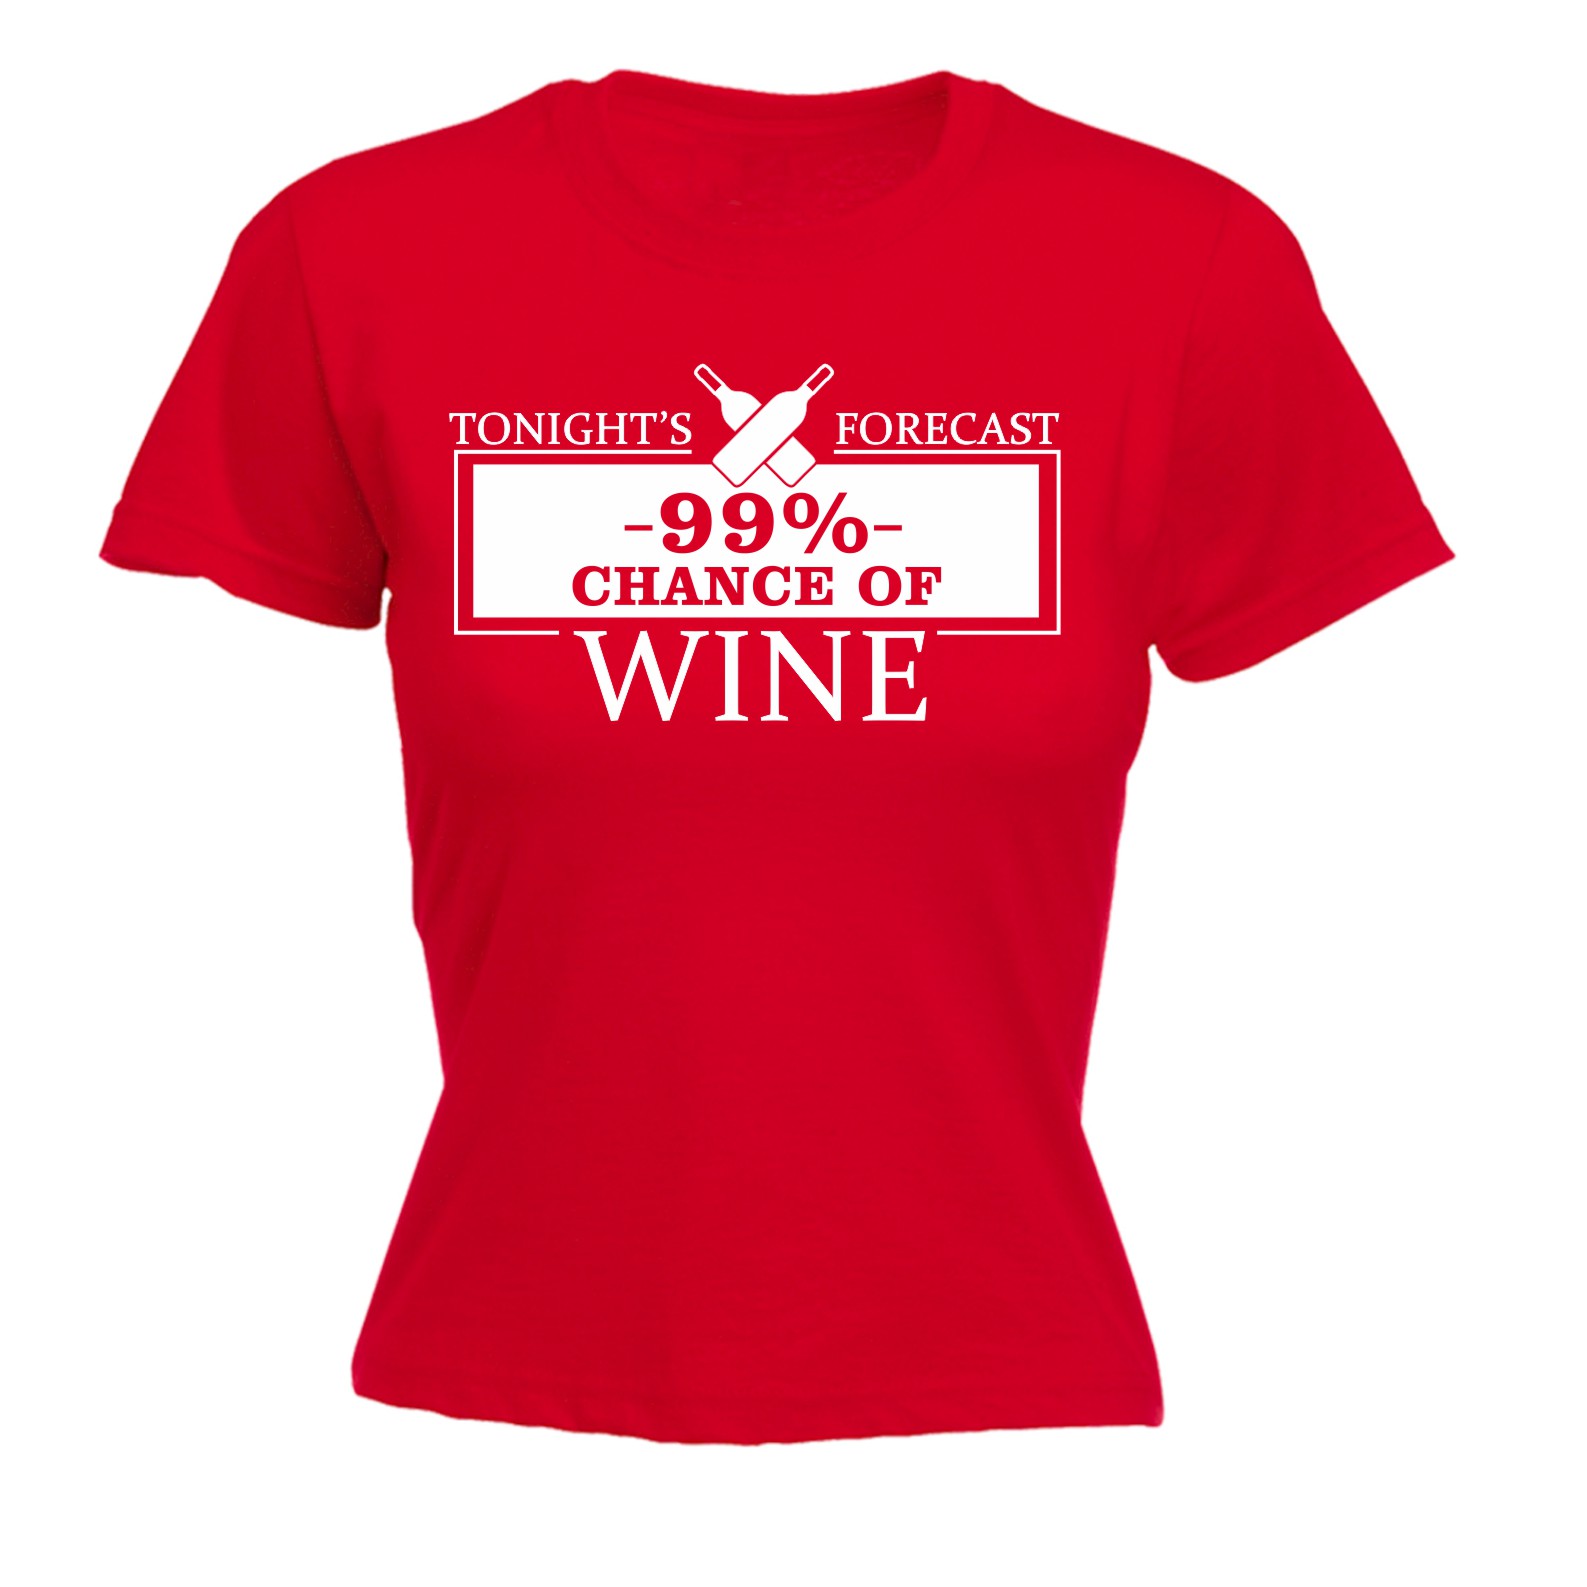 thumbnail 7 - Tonight Forecast 99% Chance Of Wine Funny Joke Adult Humour FITTED T-SHIRT Cool